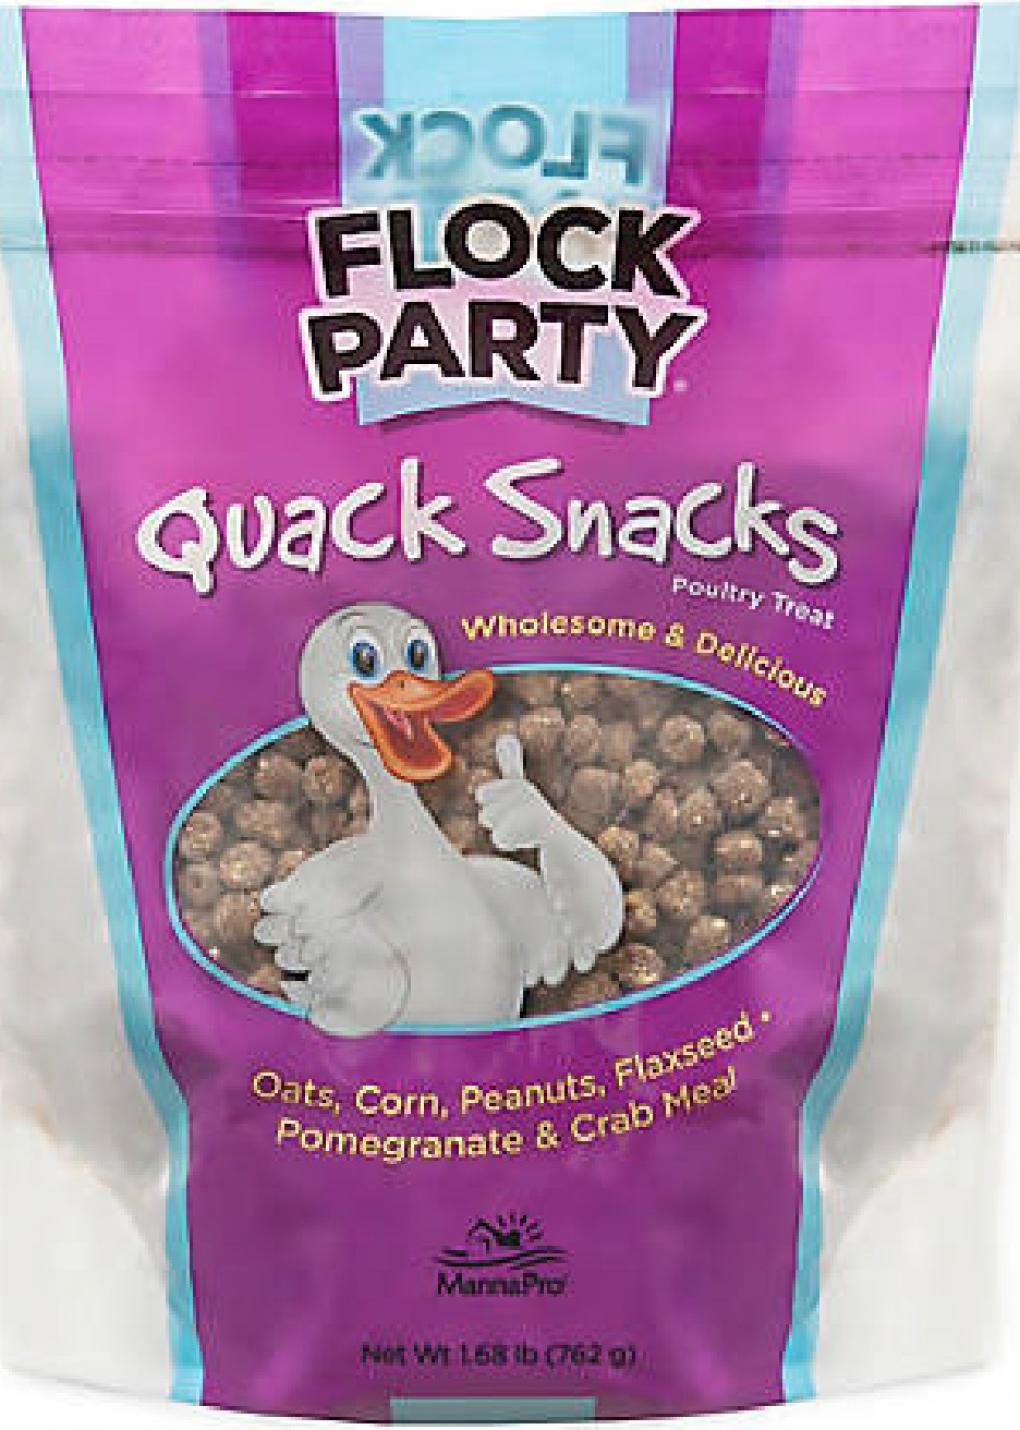 Manna Pro Products recalled Flock Party Quack Snacks due to potential Salmonella contamination